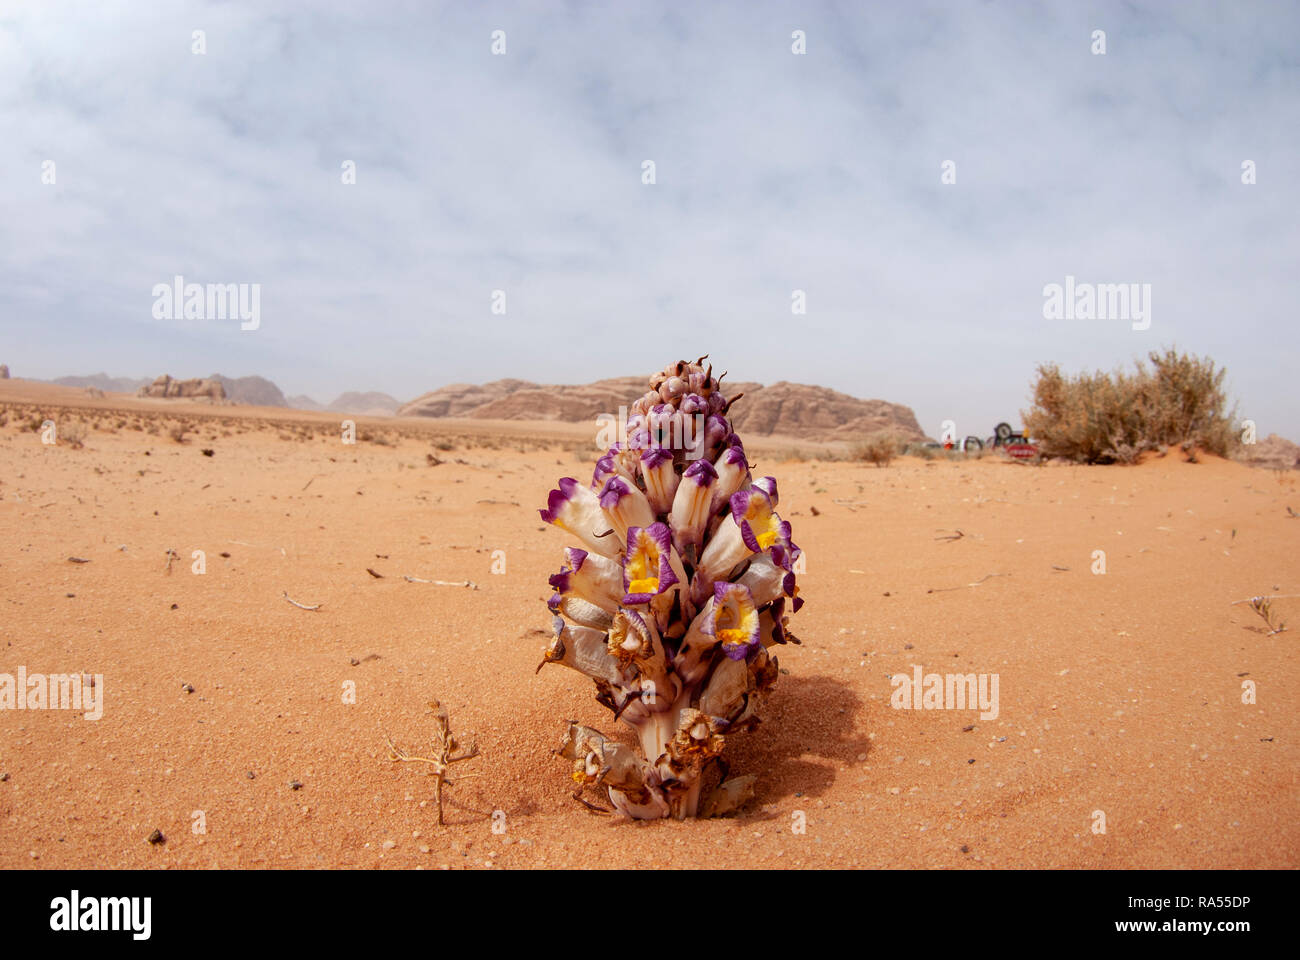 Violet Cistanche (Cistanche salsa) Also Violet Broomrape flowering in the desert. This plant is a parasitic member of the broomrape family. Photograph Stock Photo